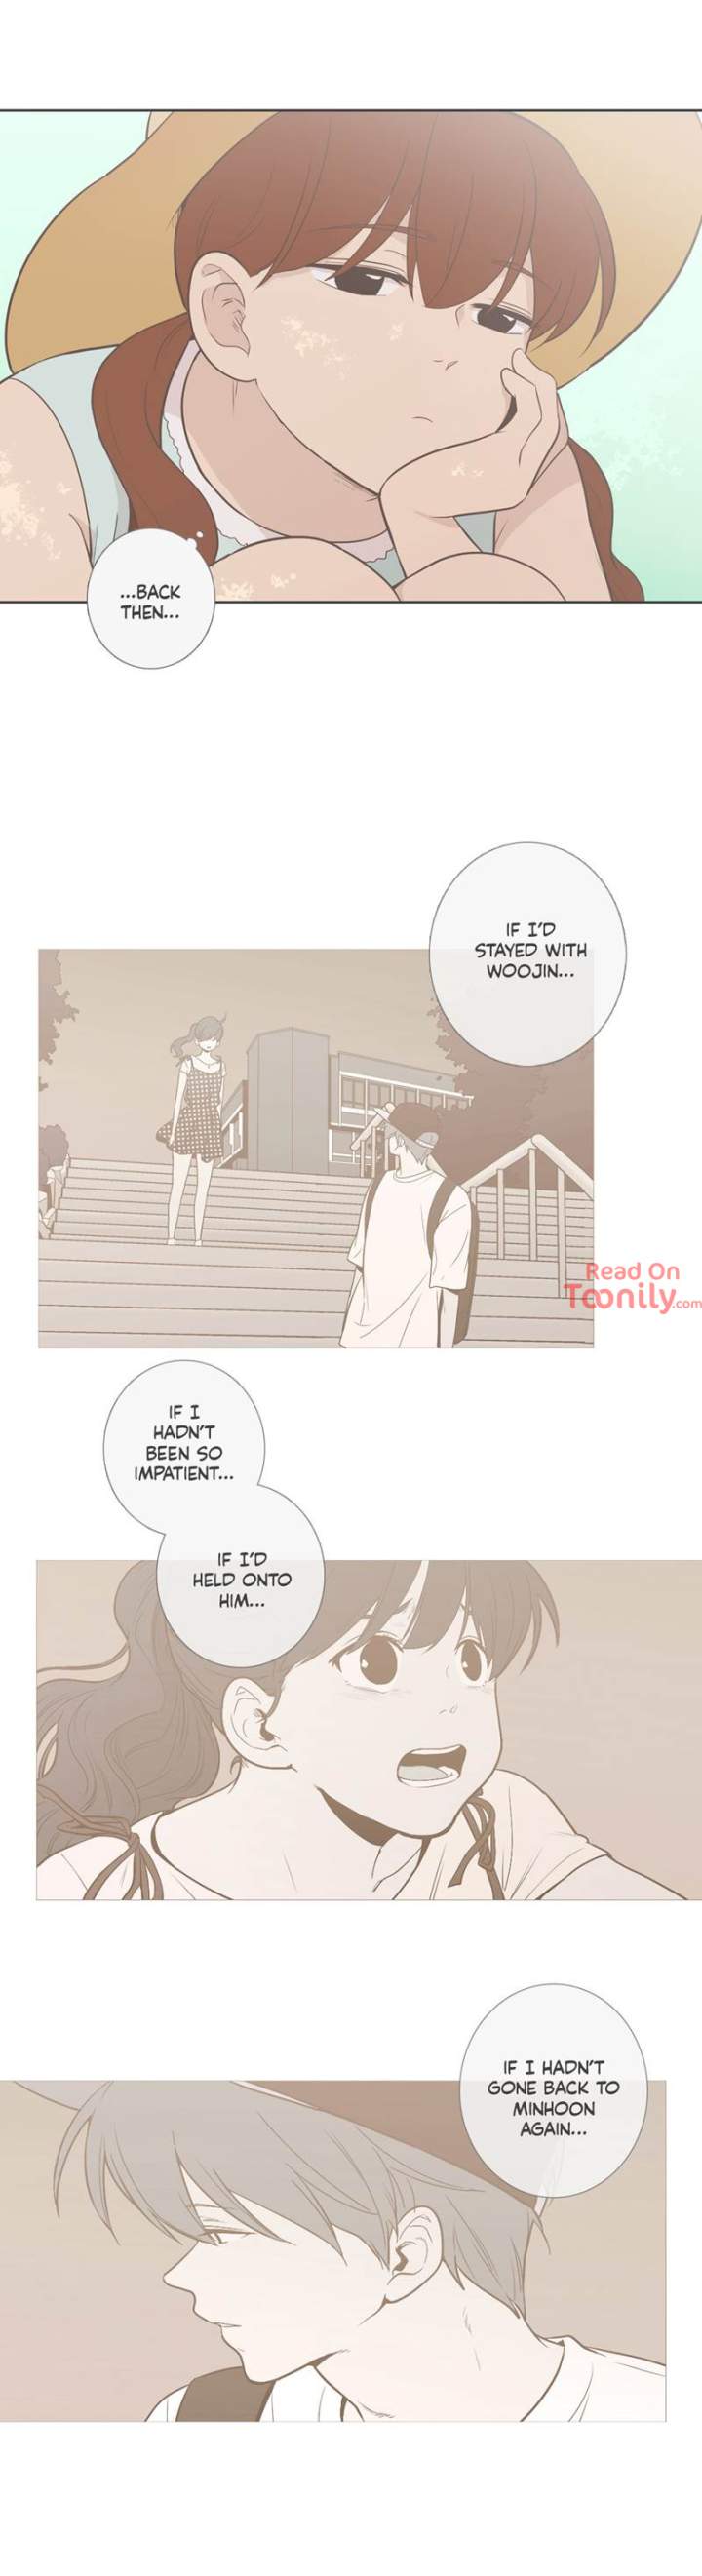 Something About Us - Chapter 83 Page 4